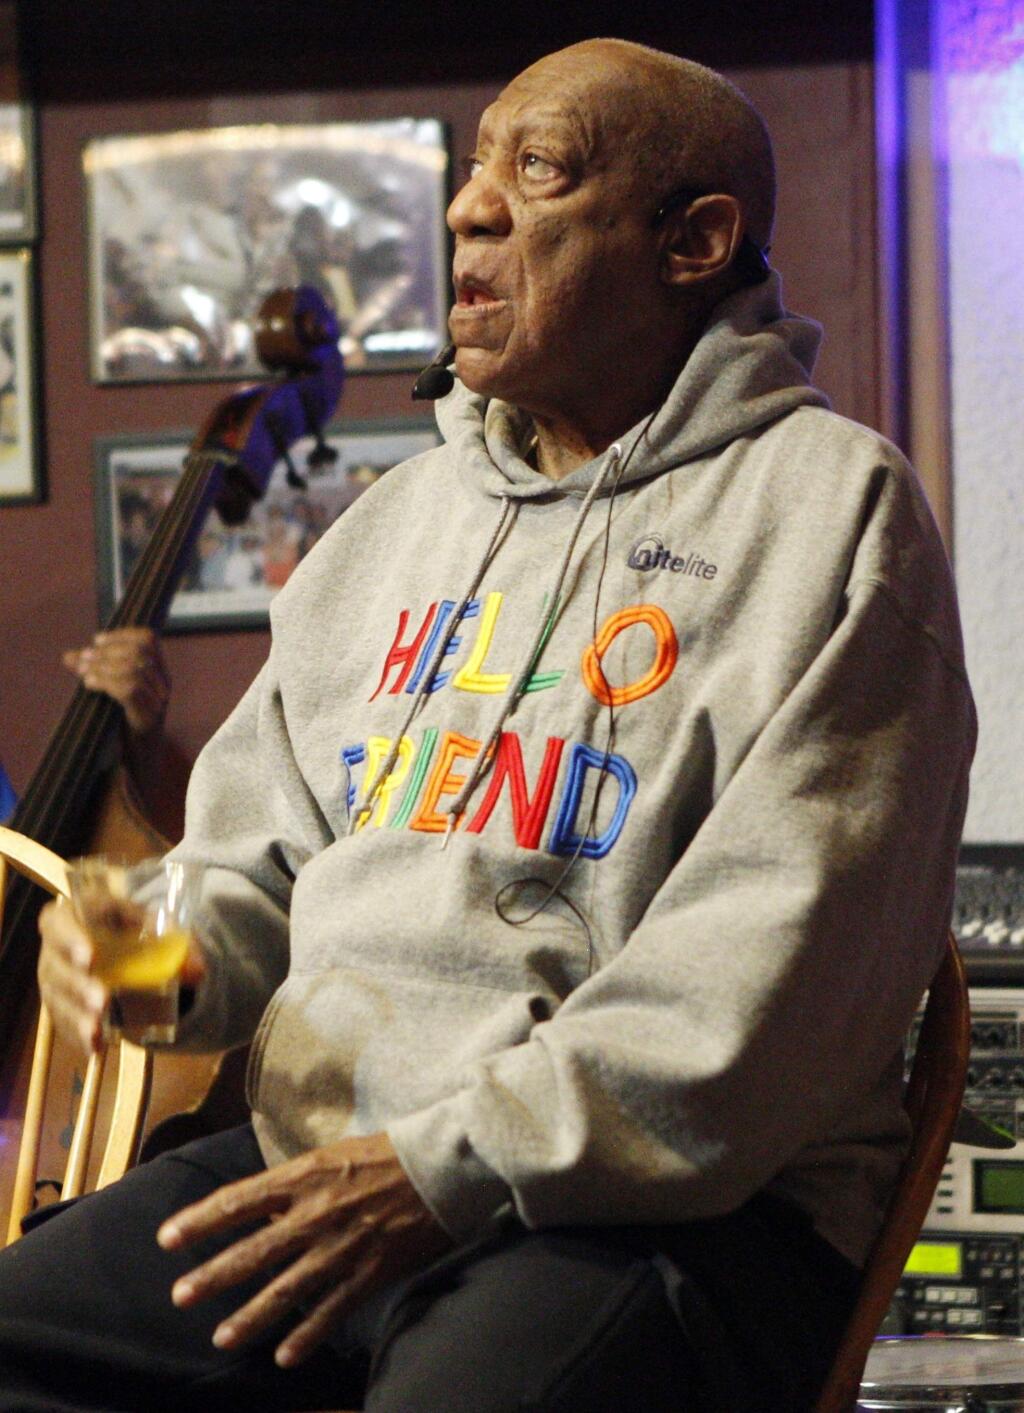 Bill Cosby performs comedy at the LaRose Jazz Club in Philadelphia on Monday, Jan. 22, 2018. It was his first public performance since his last tour ended amid protests in May 2015. Cosby has denied allegations from about 60 women that he drugged and molested them over five decades. He faces an April retrial in the only case to lead to criminal charges. (AP Photo/Michael R. Sisak)